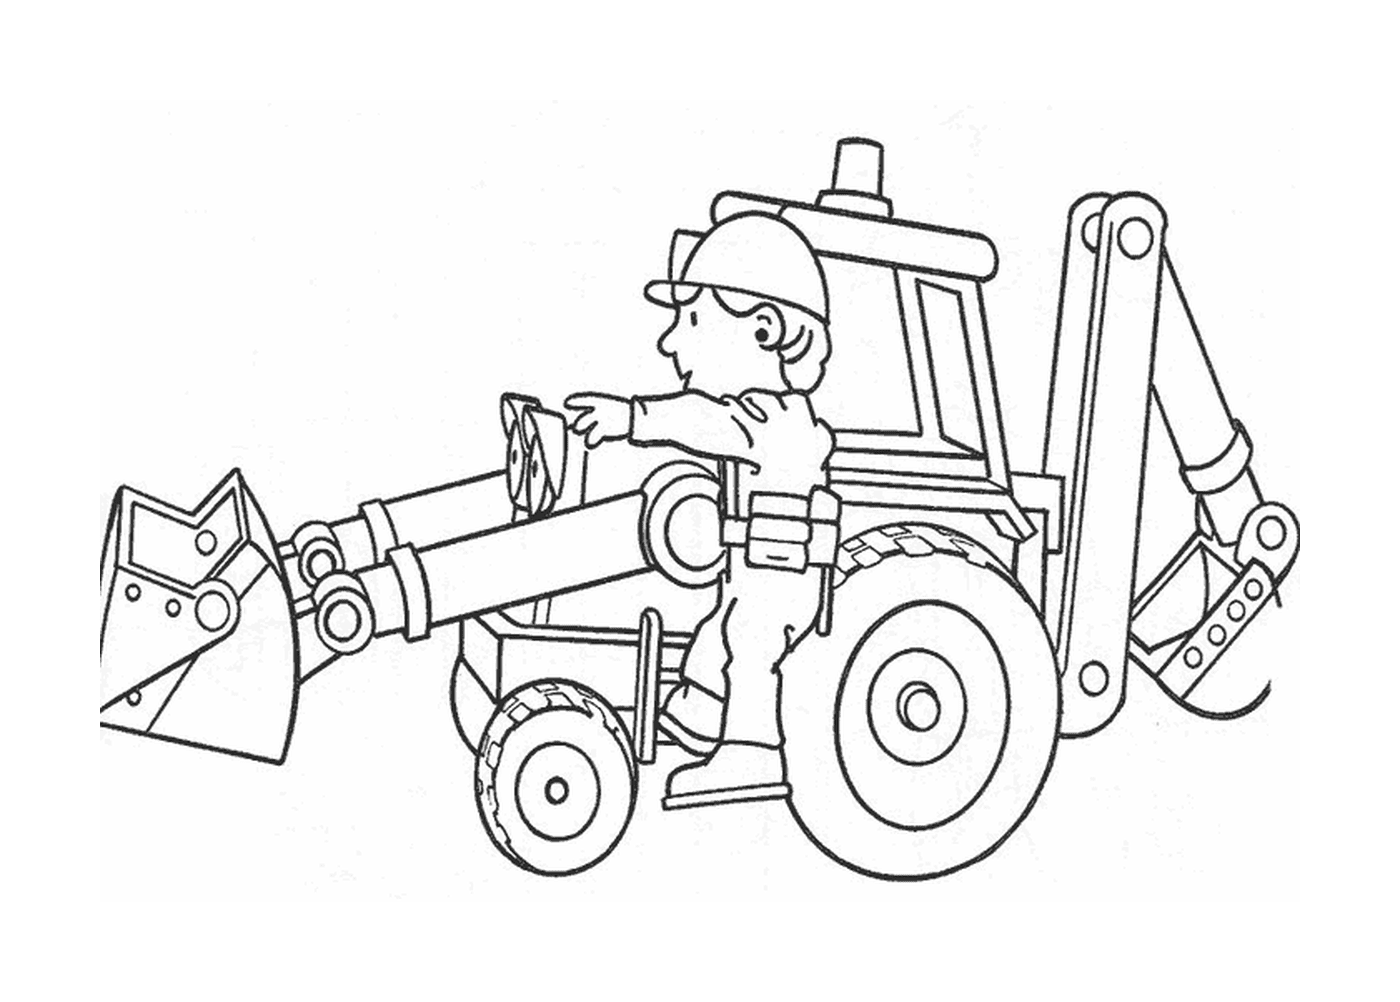  A man sitting on a tractor 